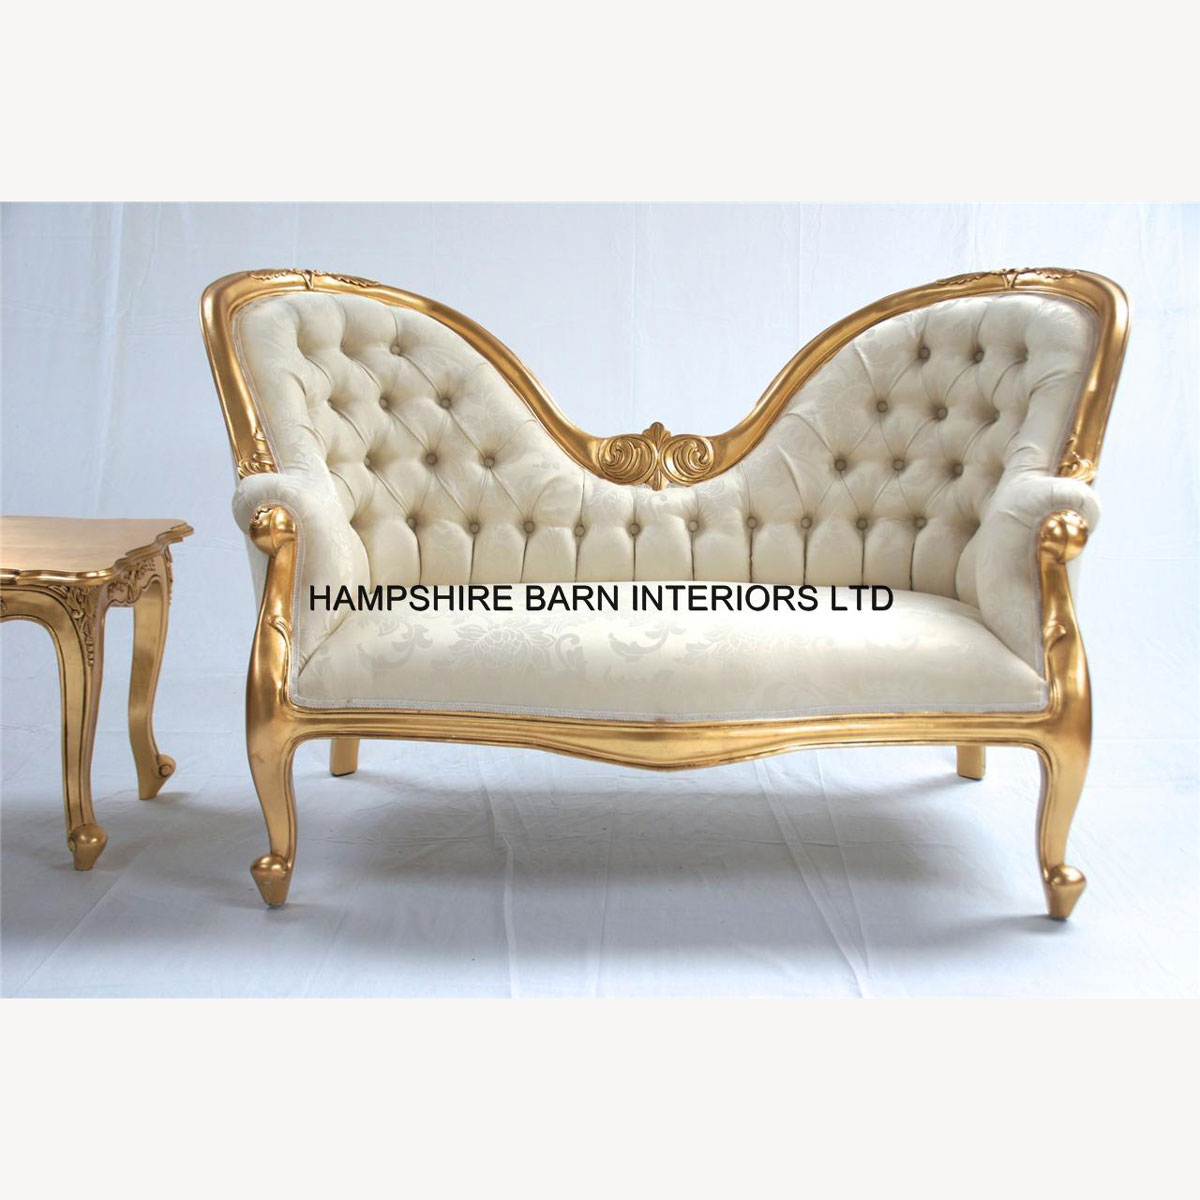 Parisian Double Ended Sofa In Gold Leaf And Ivory Cream Fabric 5 - Hampshire Barn Interiors - Parisian Double Ended Sofa In Gold Leaf And Ivory Cream Fabric -